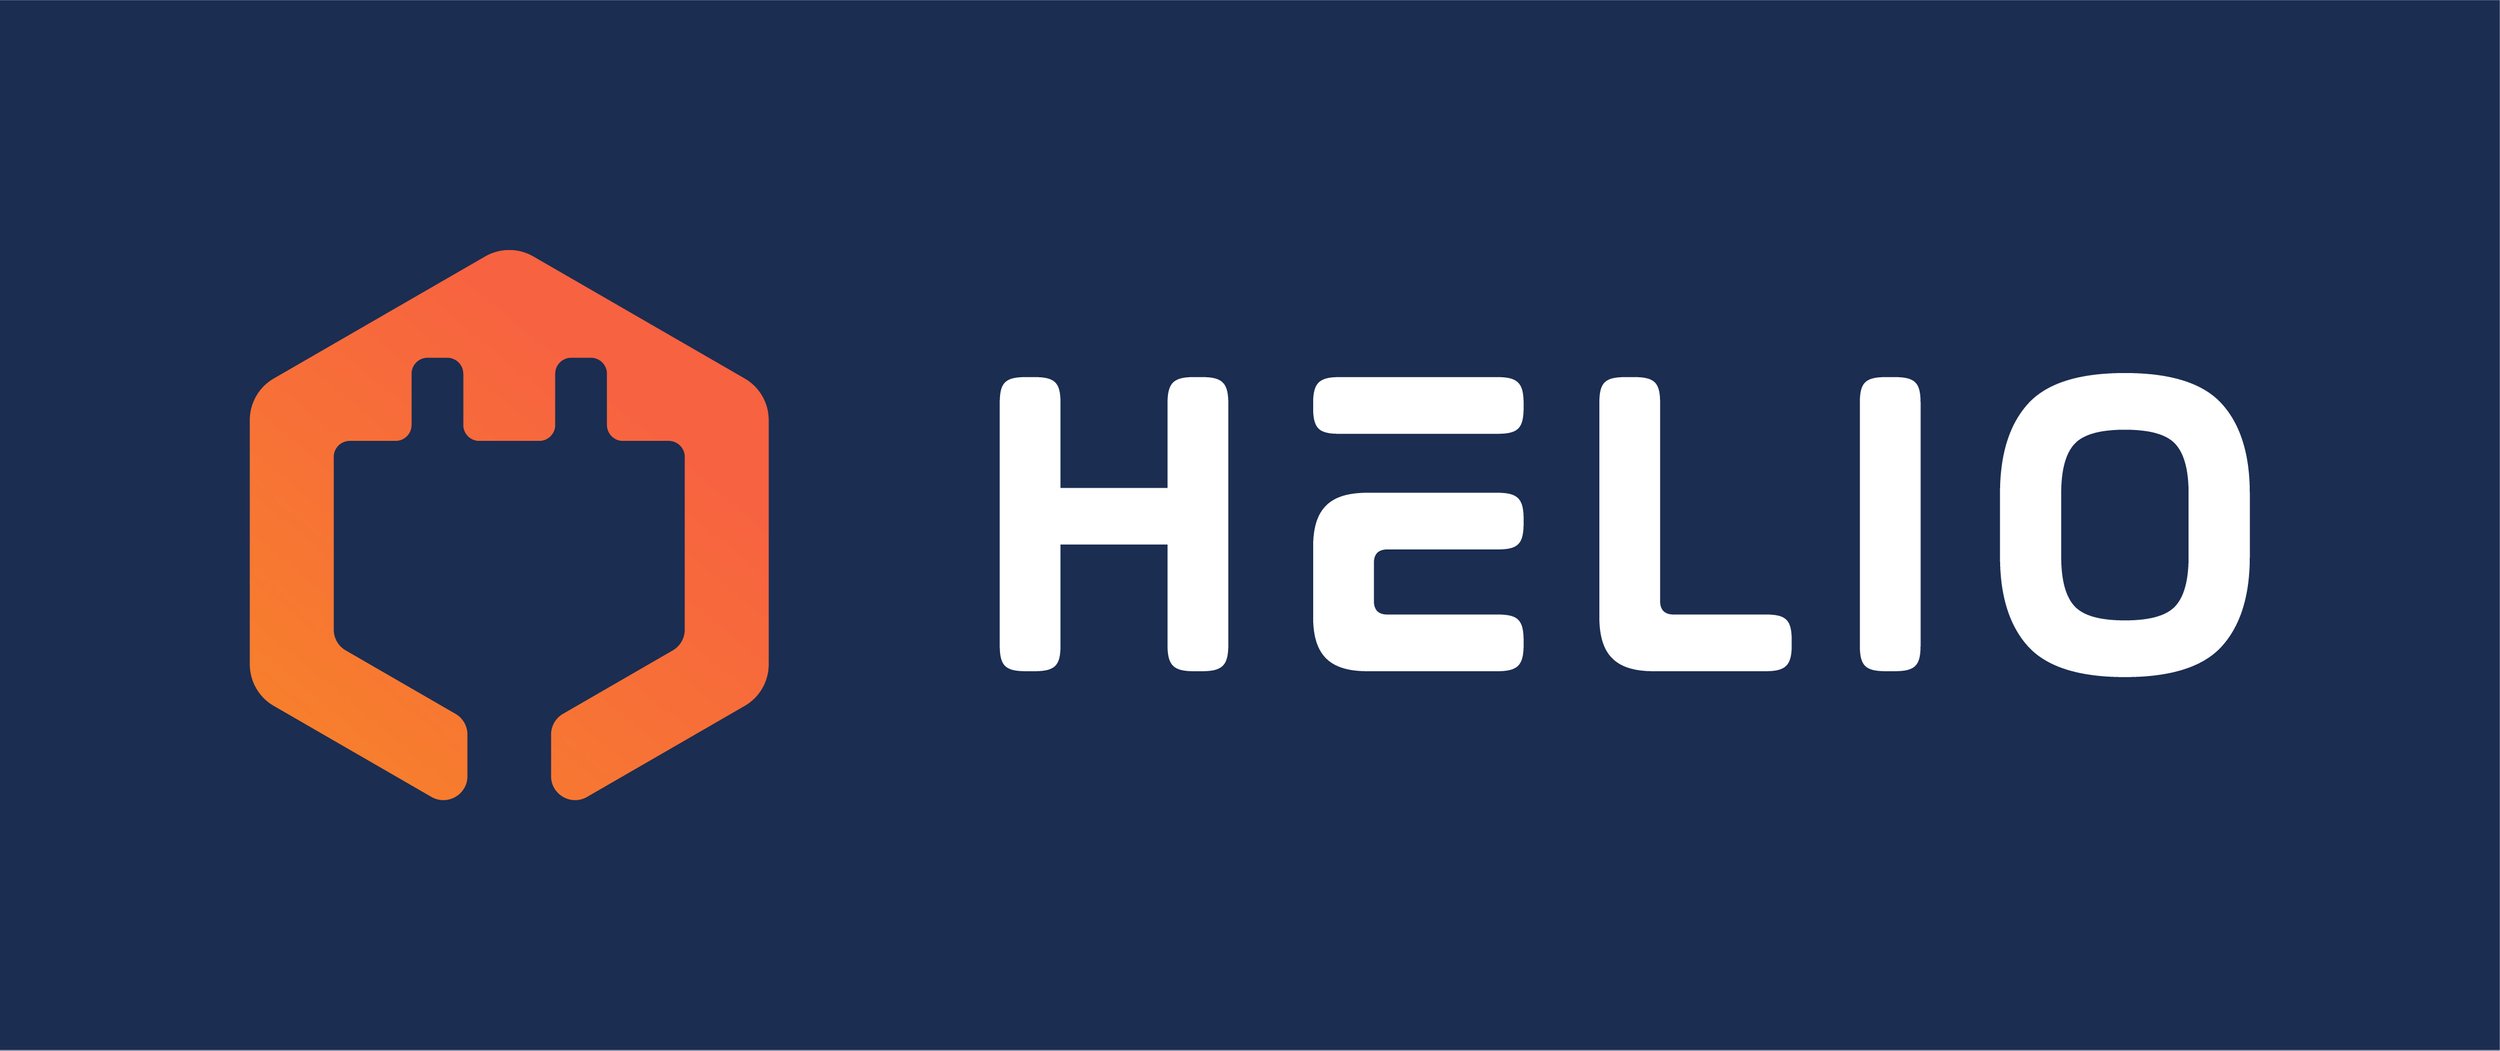 05 Secondary Logo - Helio Without Slogan_02 Colored Dark Blue Background.jpg